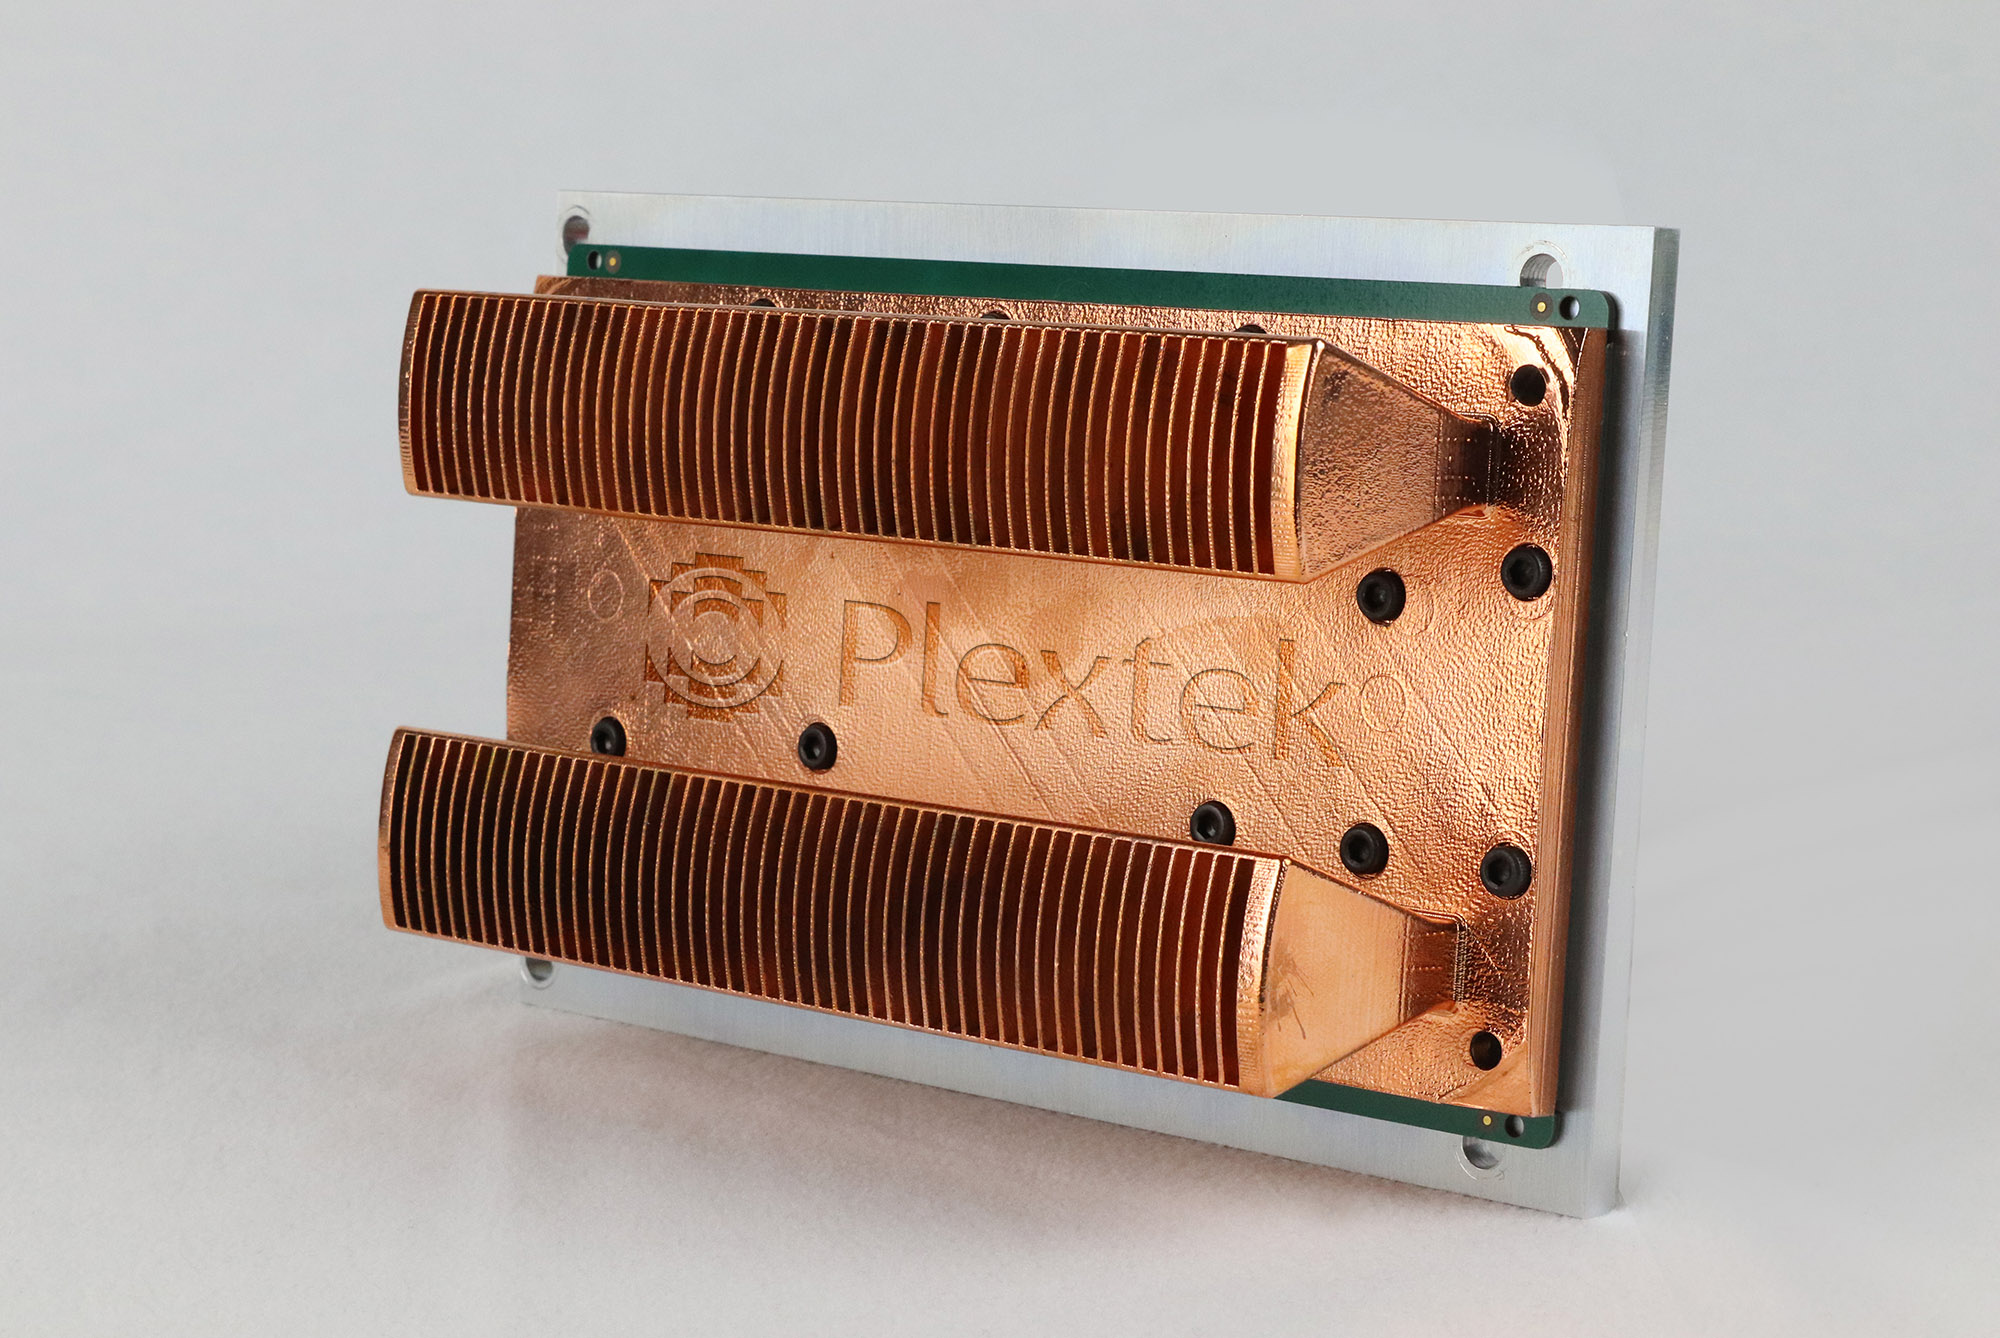 Plextek-DTS mmWave e-scan radar device will play its role in countering the malicious UAS threat